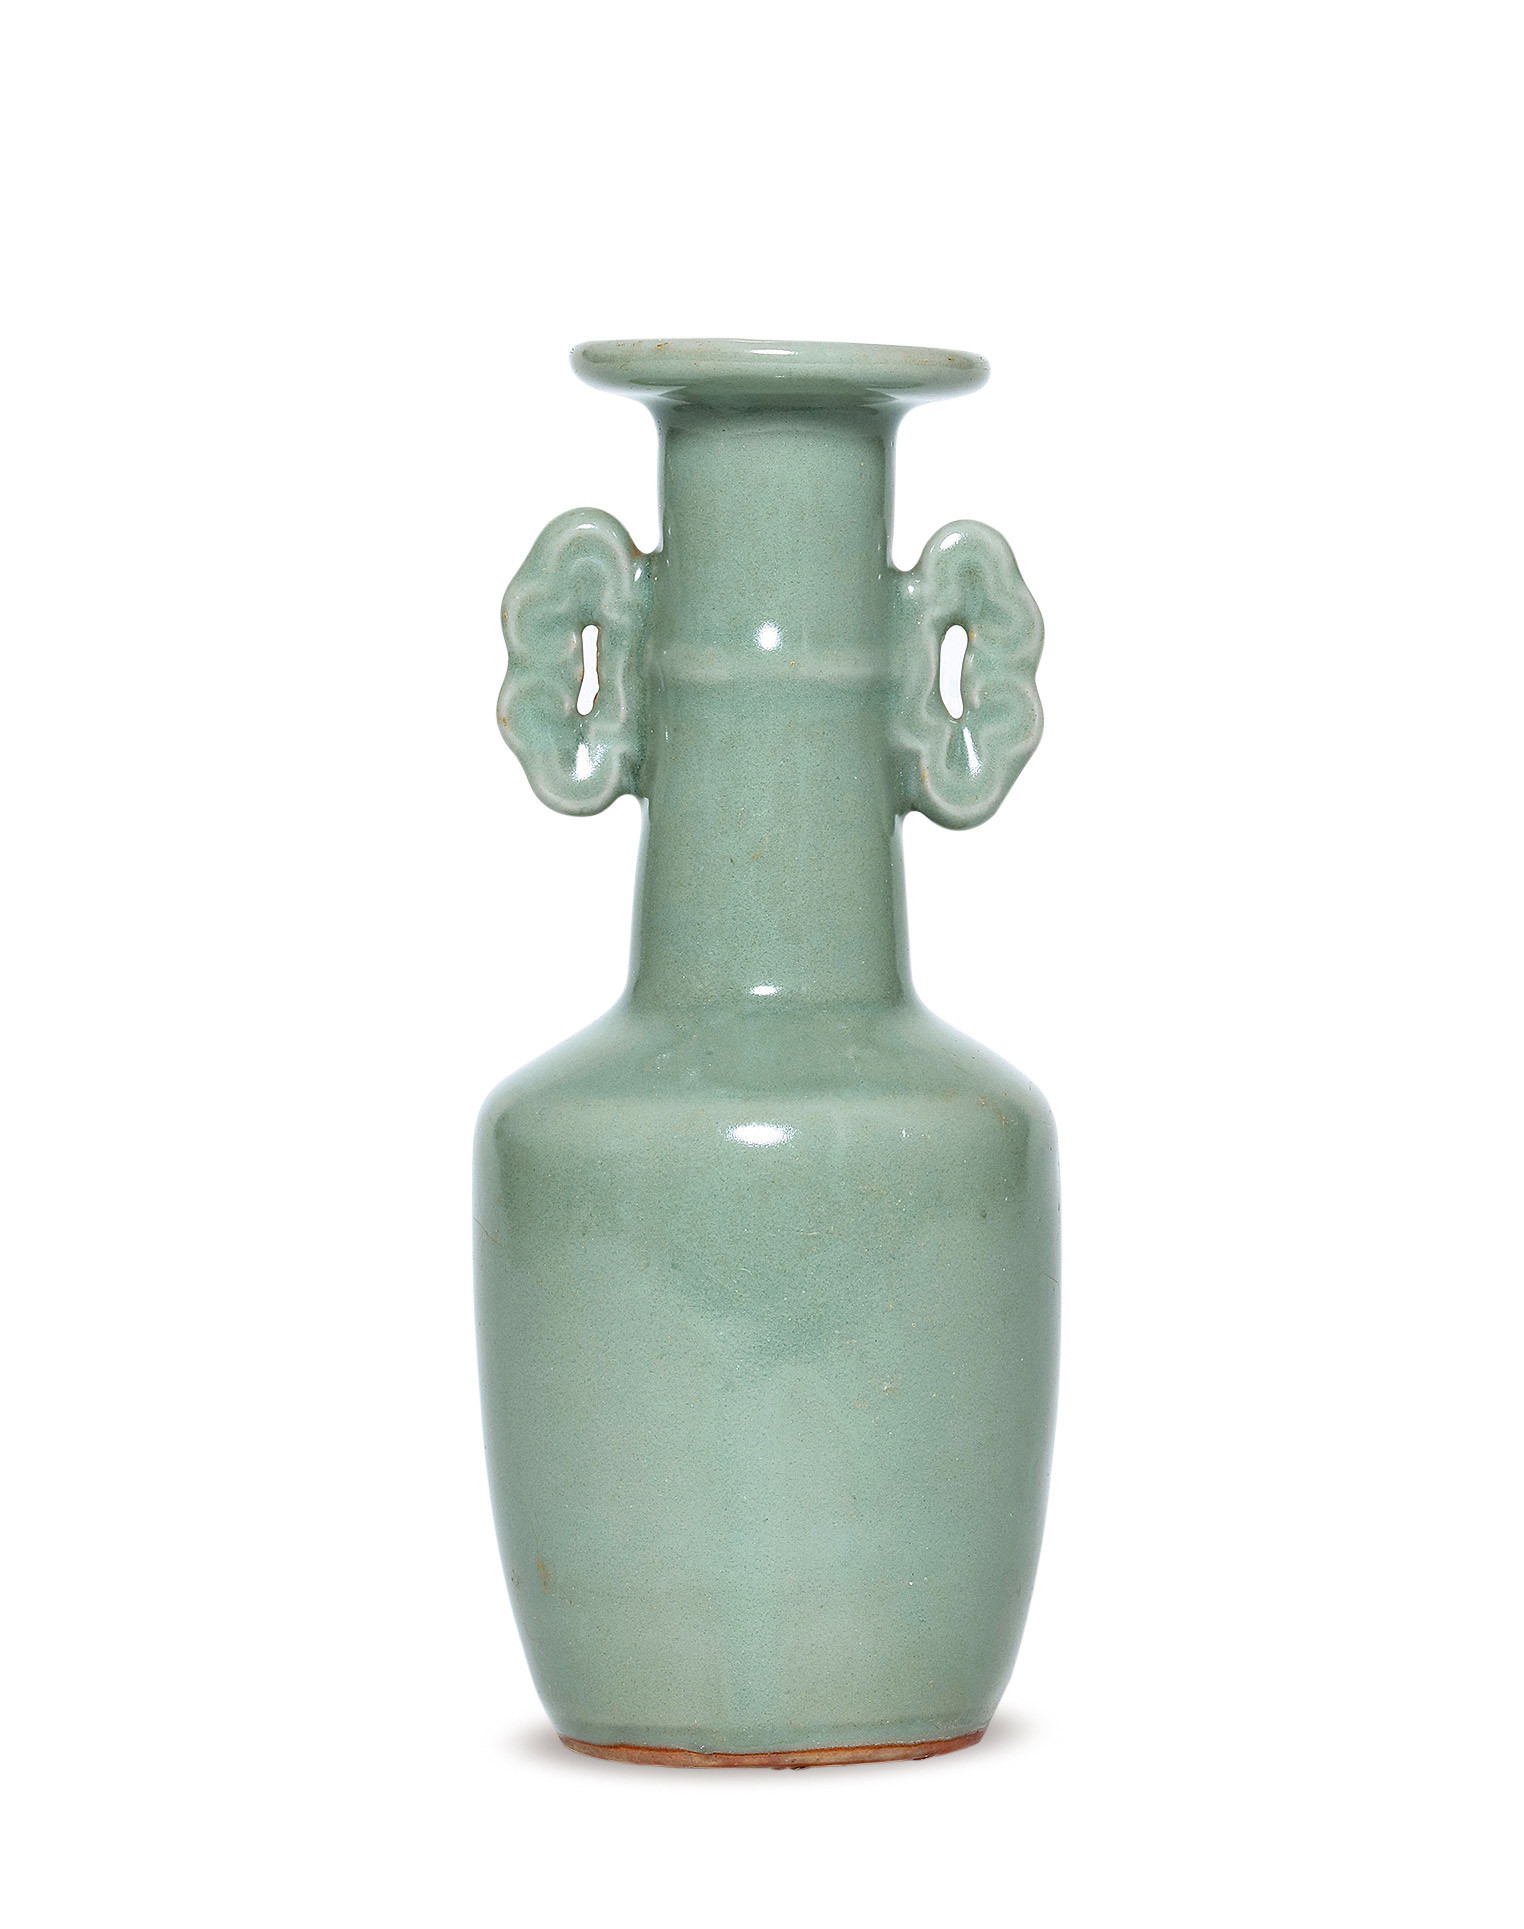 A LONGQUAN WARE VASE WITH HANDLES DESIGN